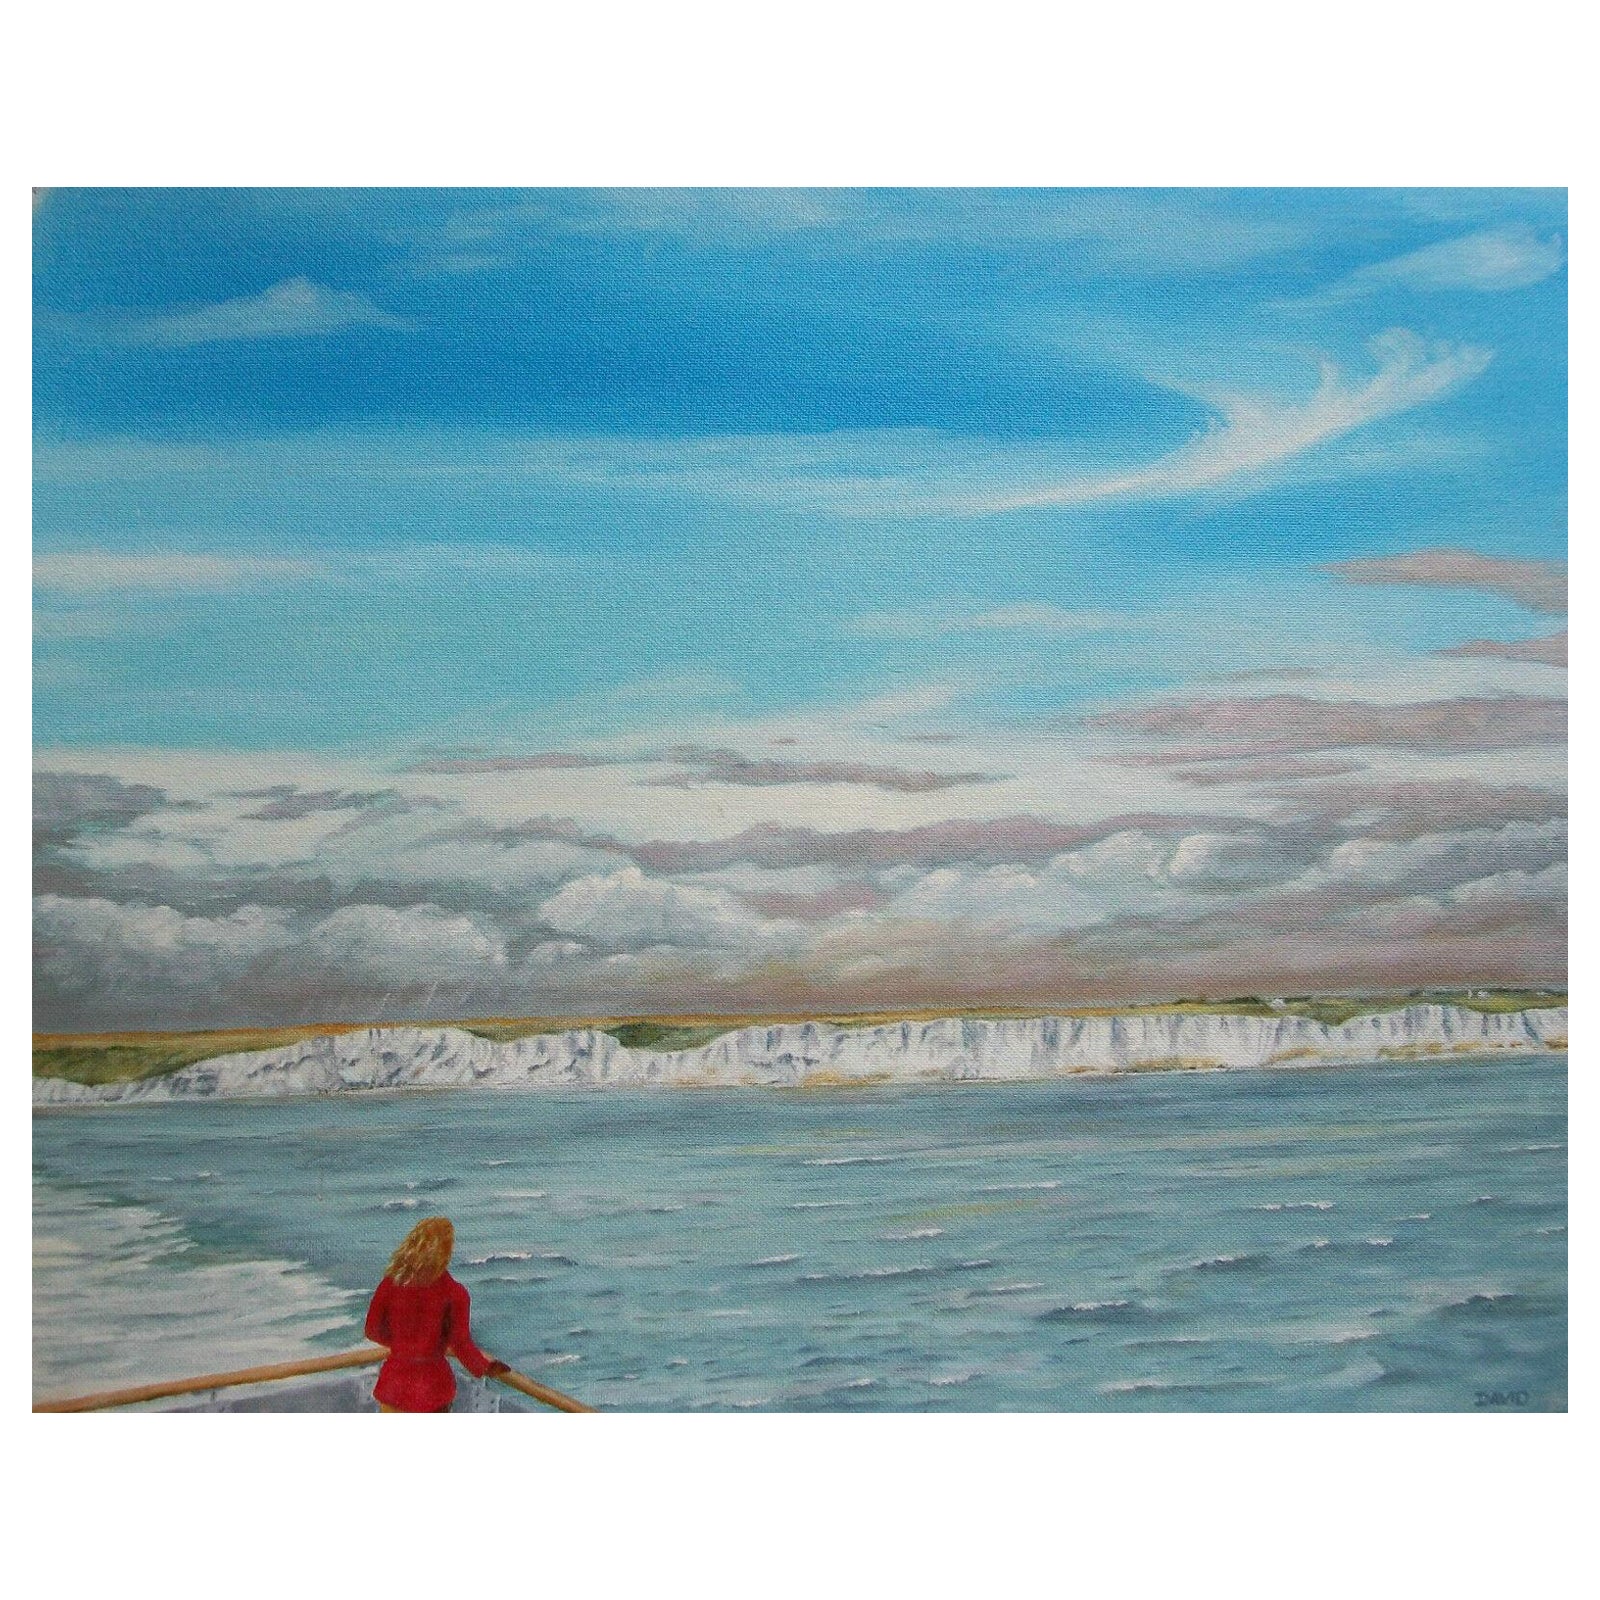 DAVID LANGDON - 'Cliffs of Dover' - Contemporary Oil Painting - Signed - C. 2000 For Sale